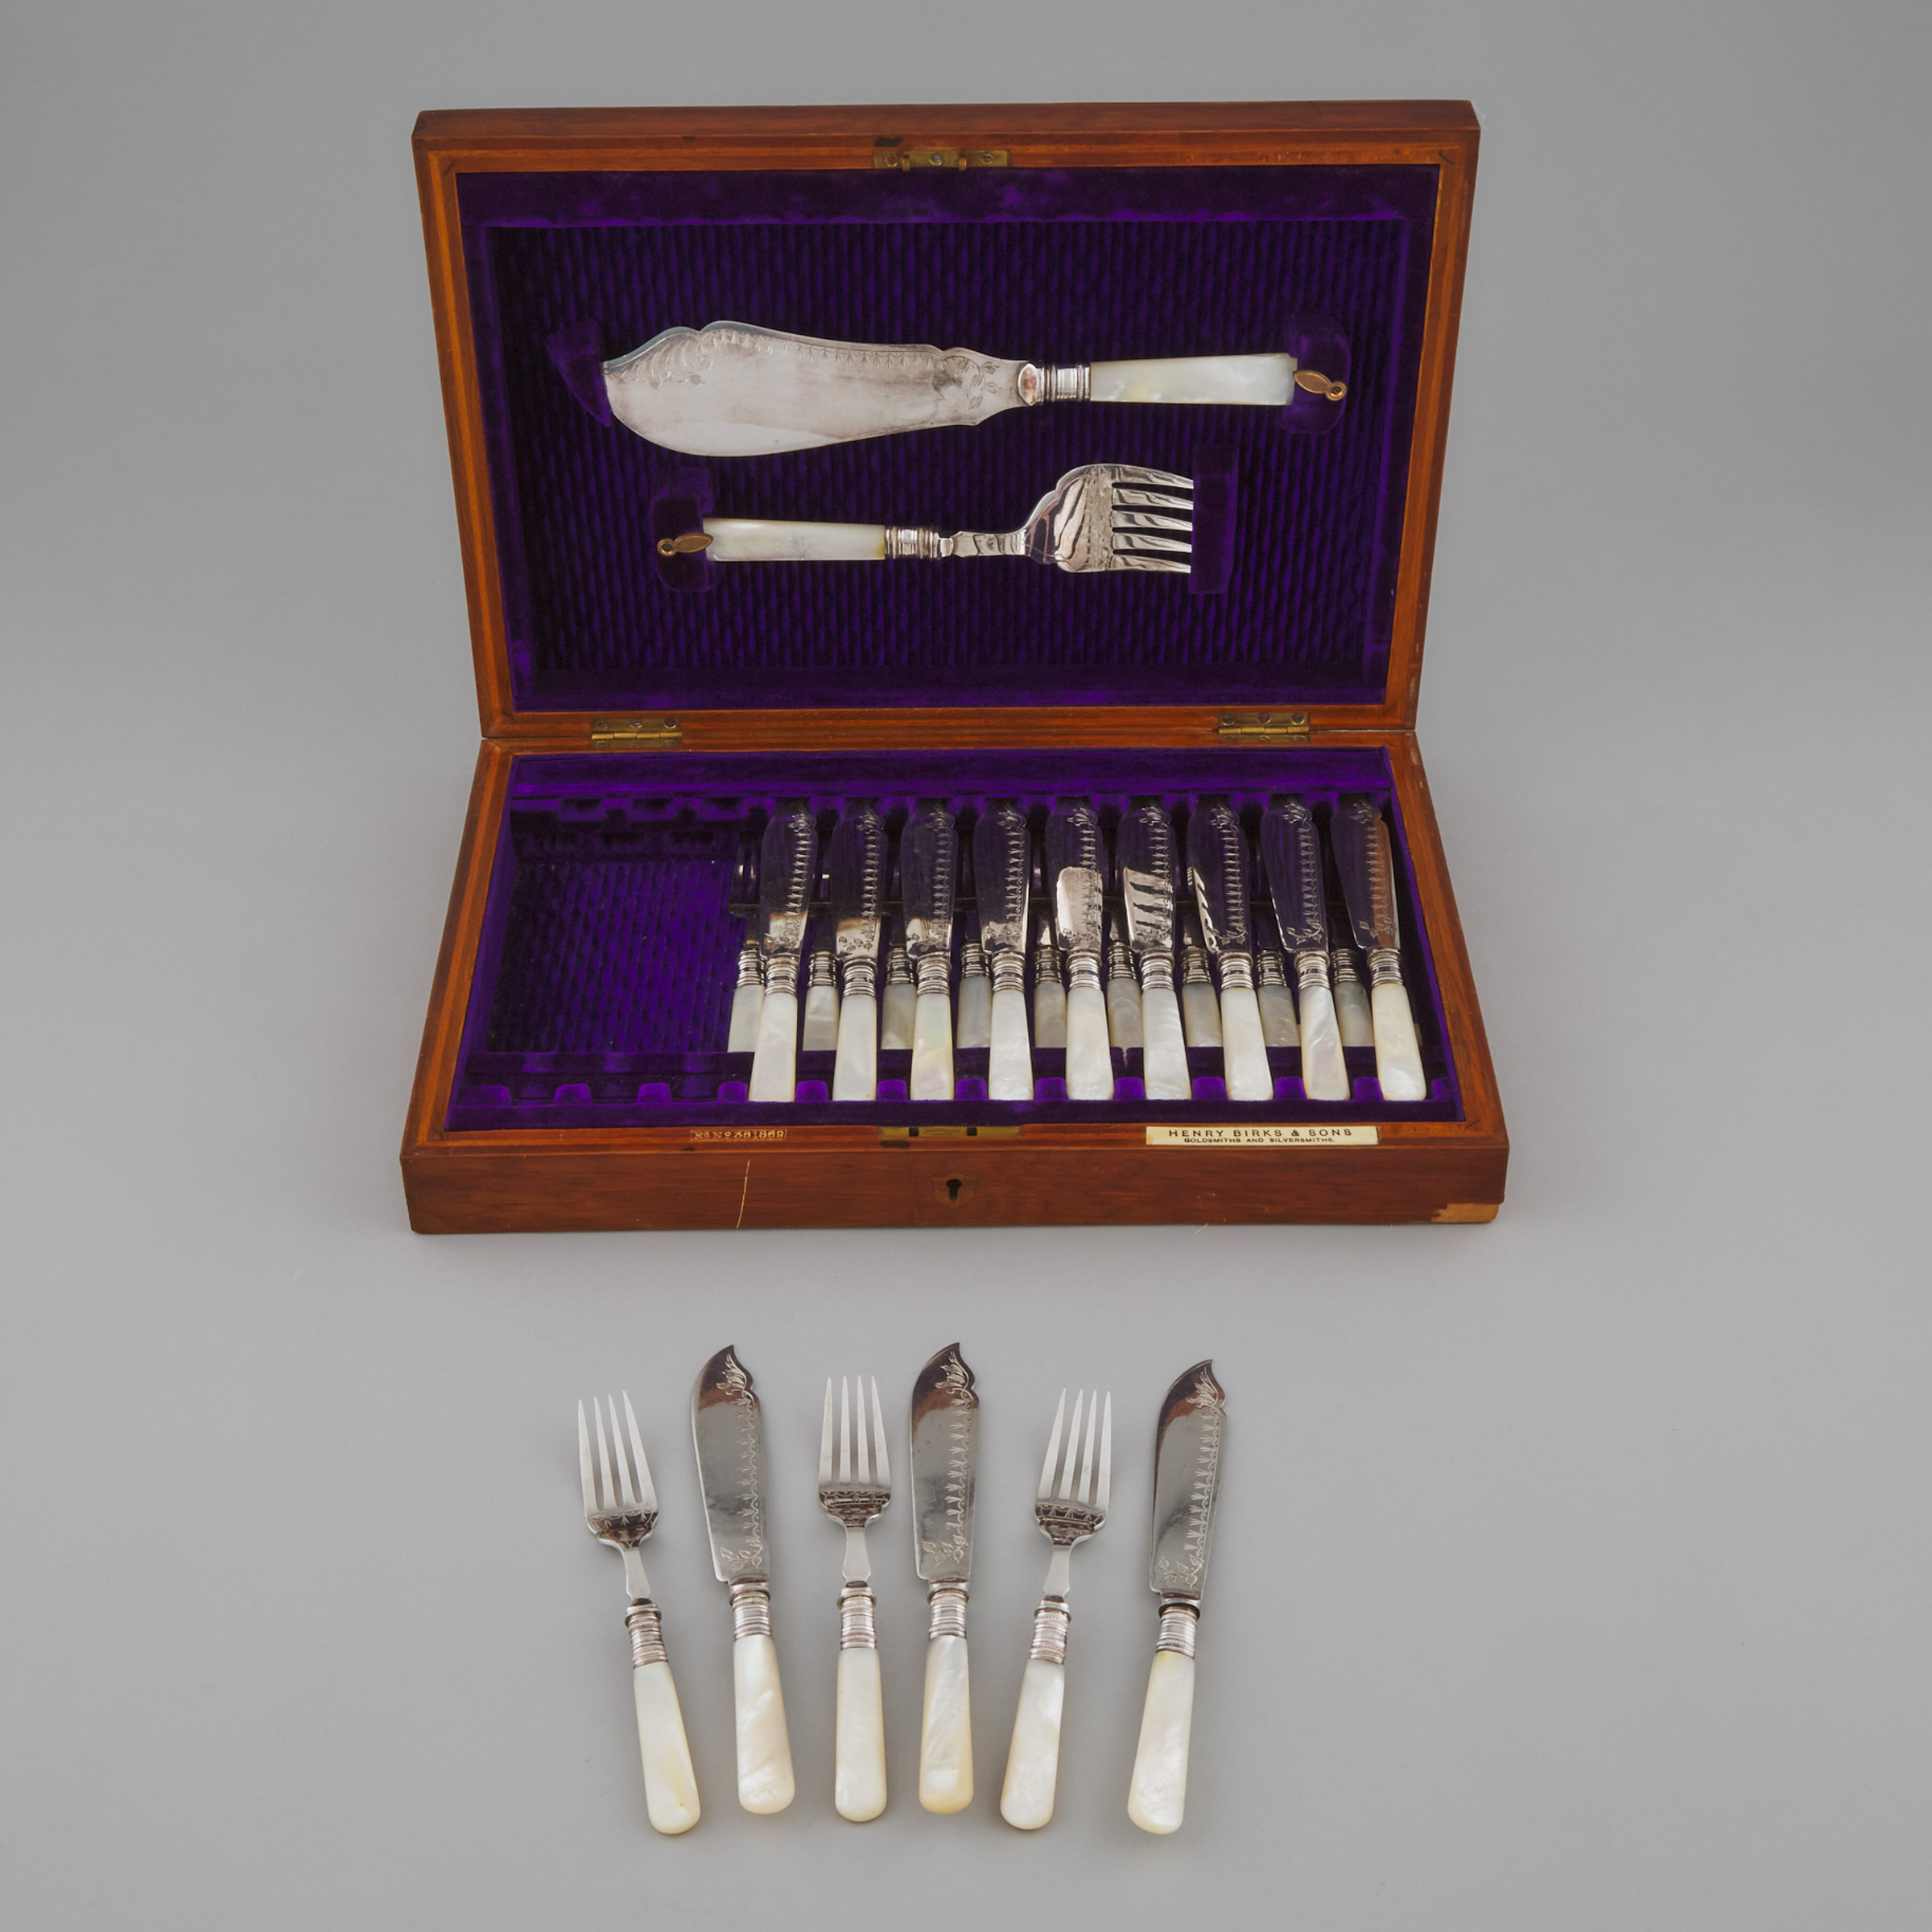 Canadian Silver Plated and Mother-of-Pearl Fish Service, Henry Birks & Sons, early 20th century